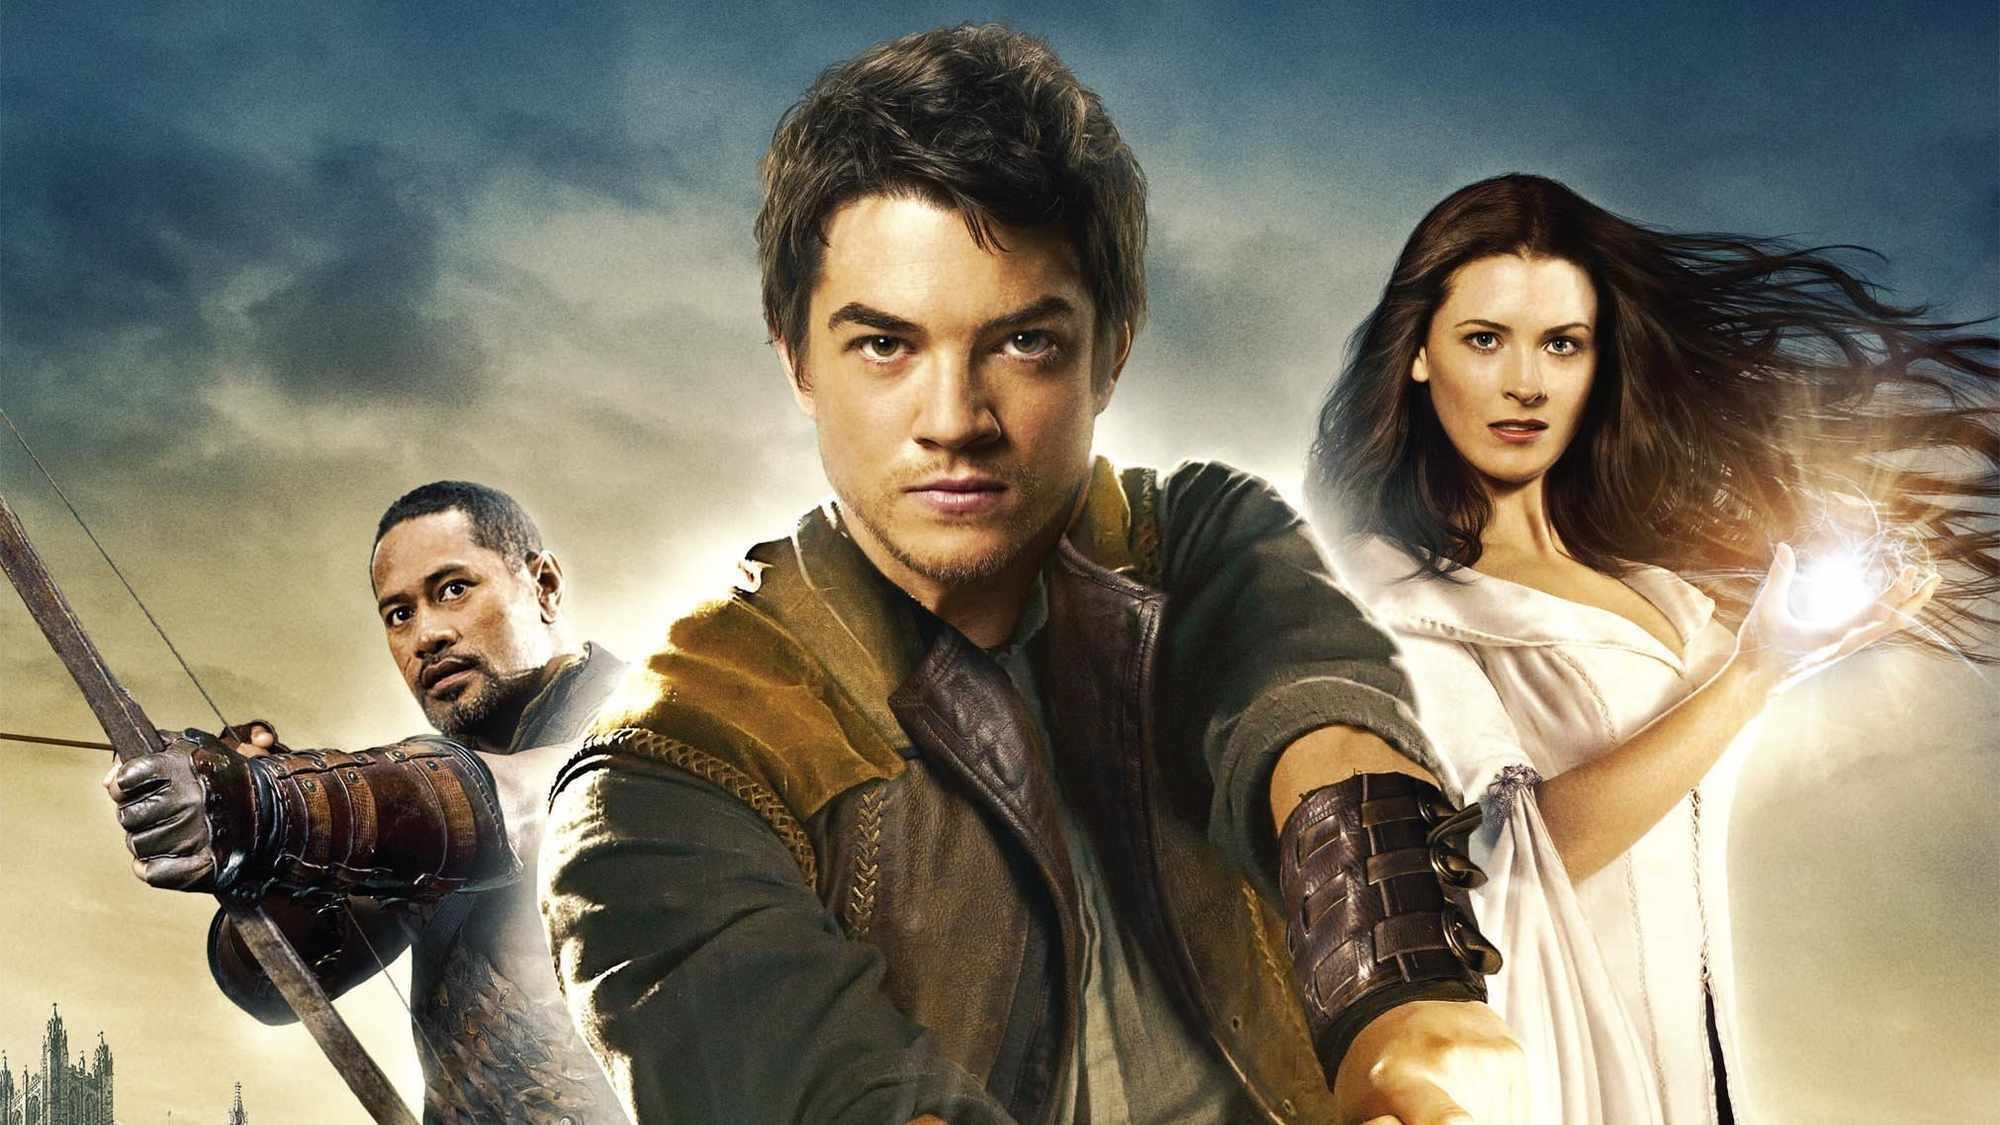 Legend of the Seeker (TV Series): Craig Horner as Richard Cypher, The main protagonist of the adventure show. 2000x1130 HD Wallpaper.